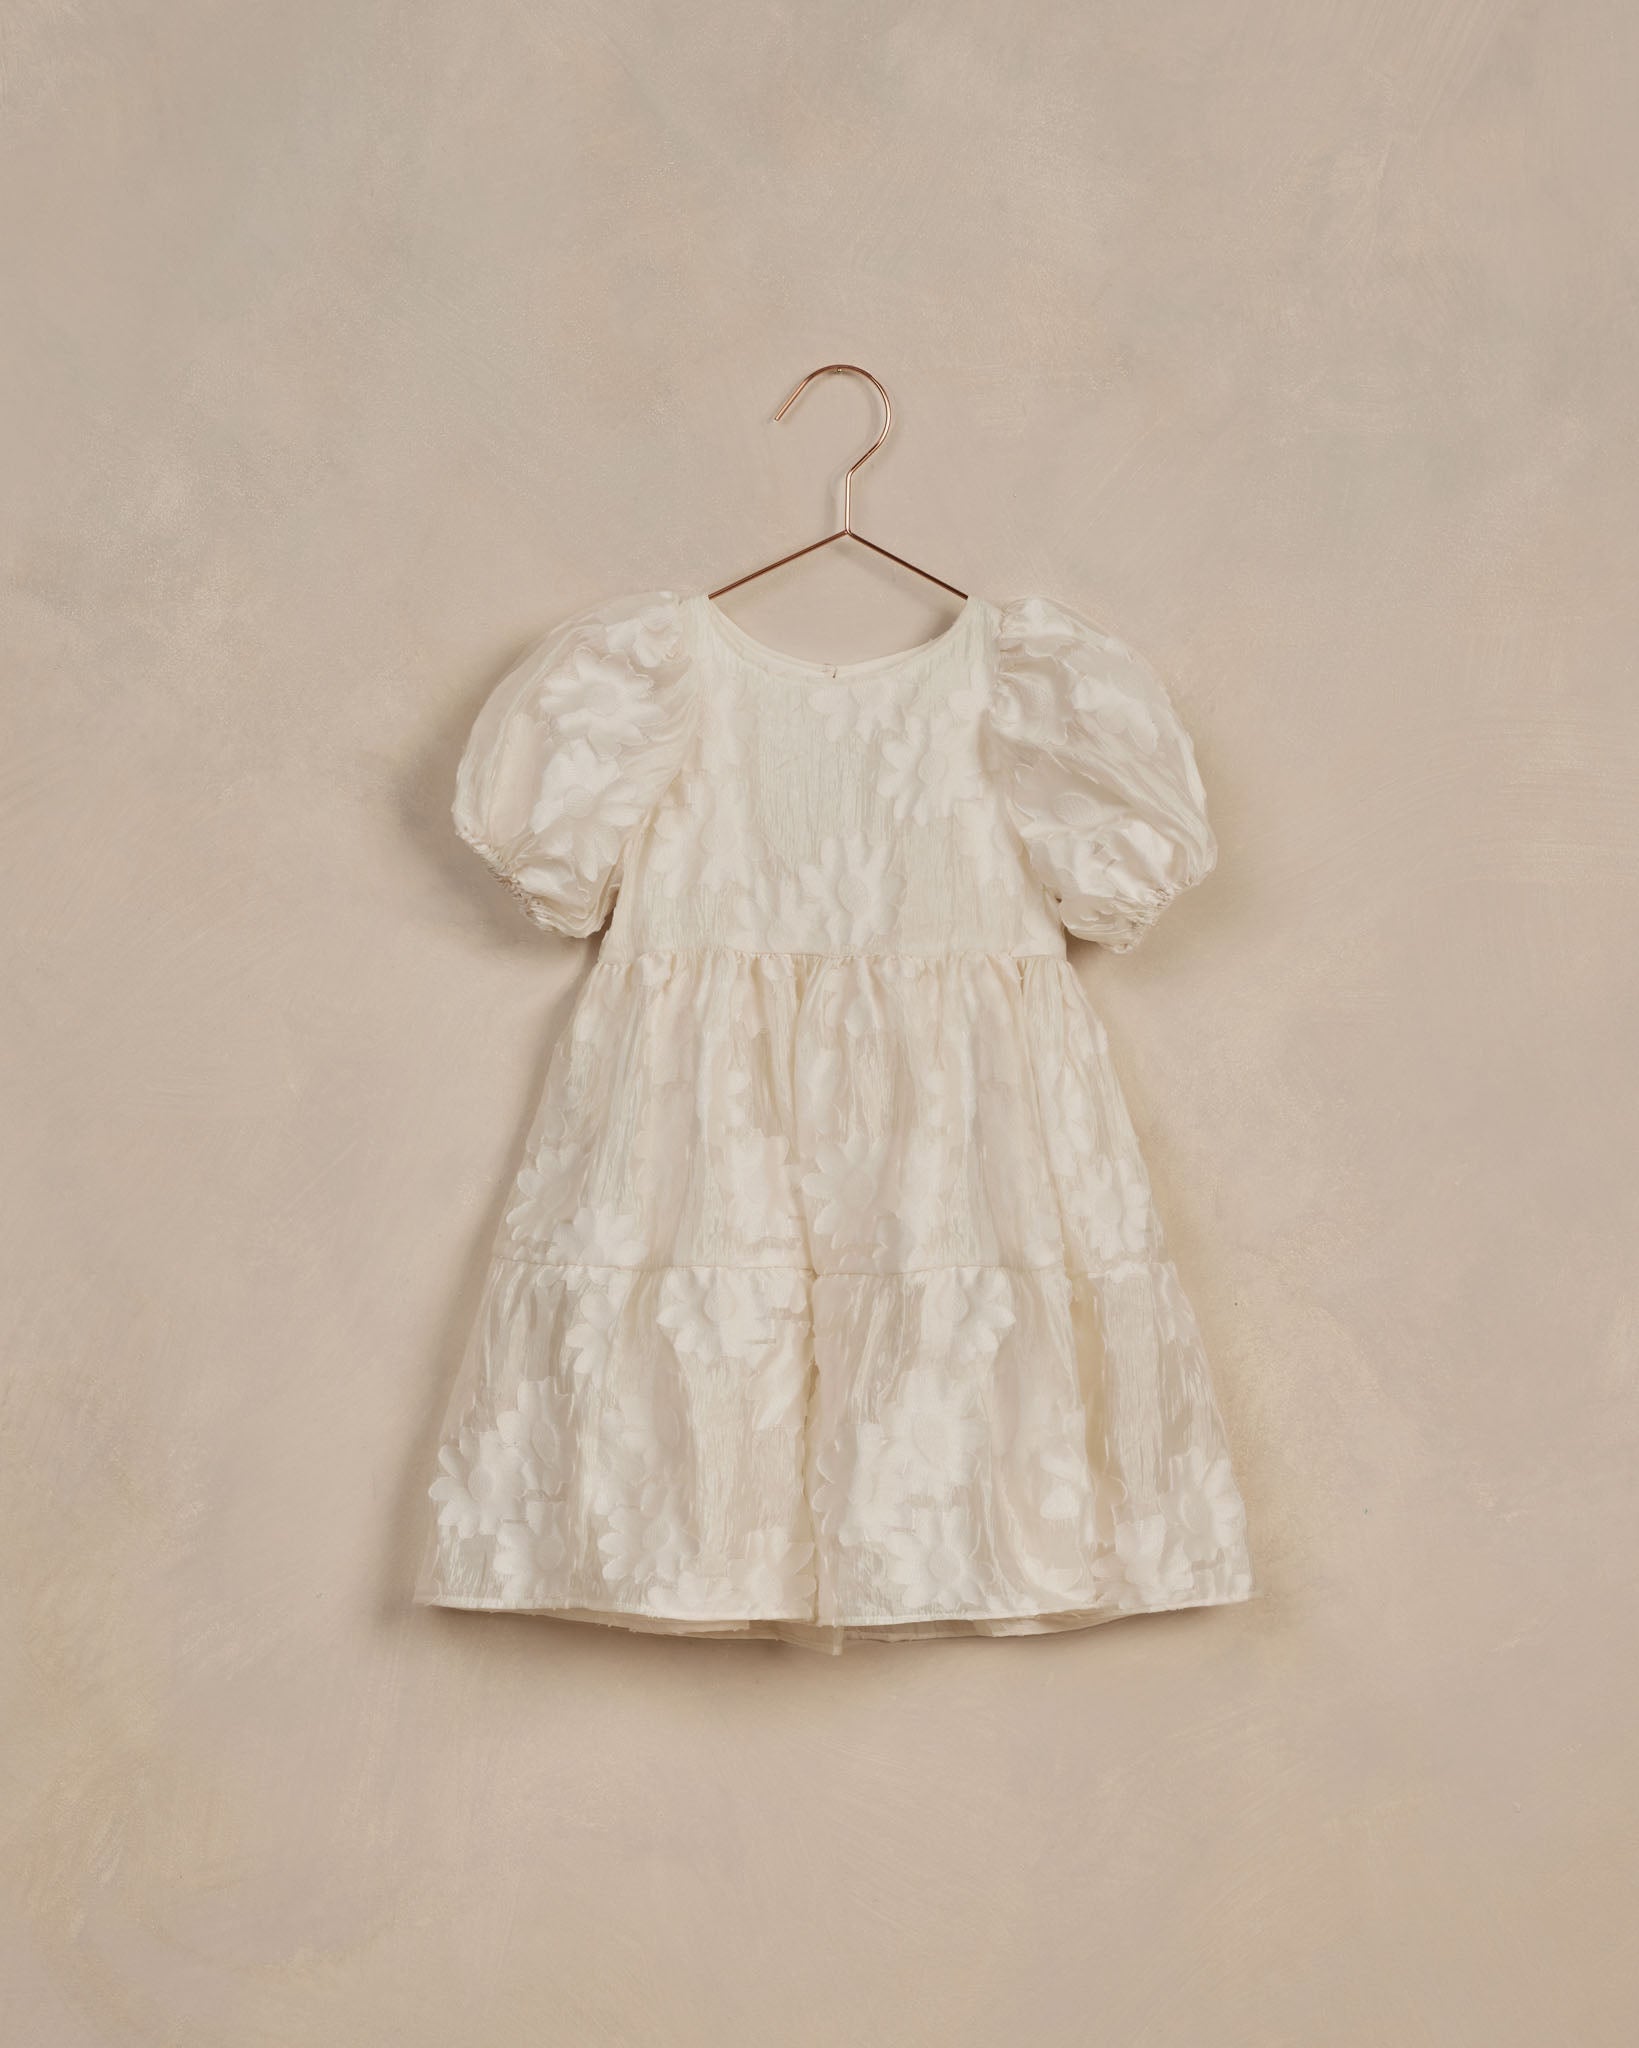 Chloe Dress || Daisy Organza - Rylee + Cru | Kids Clothes | Trendy Baby Clothes | Modern Infant Outfits |